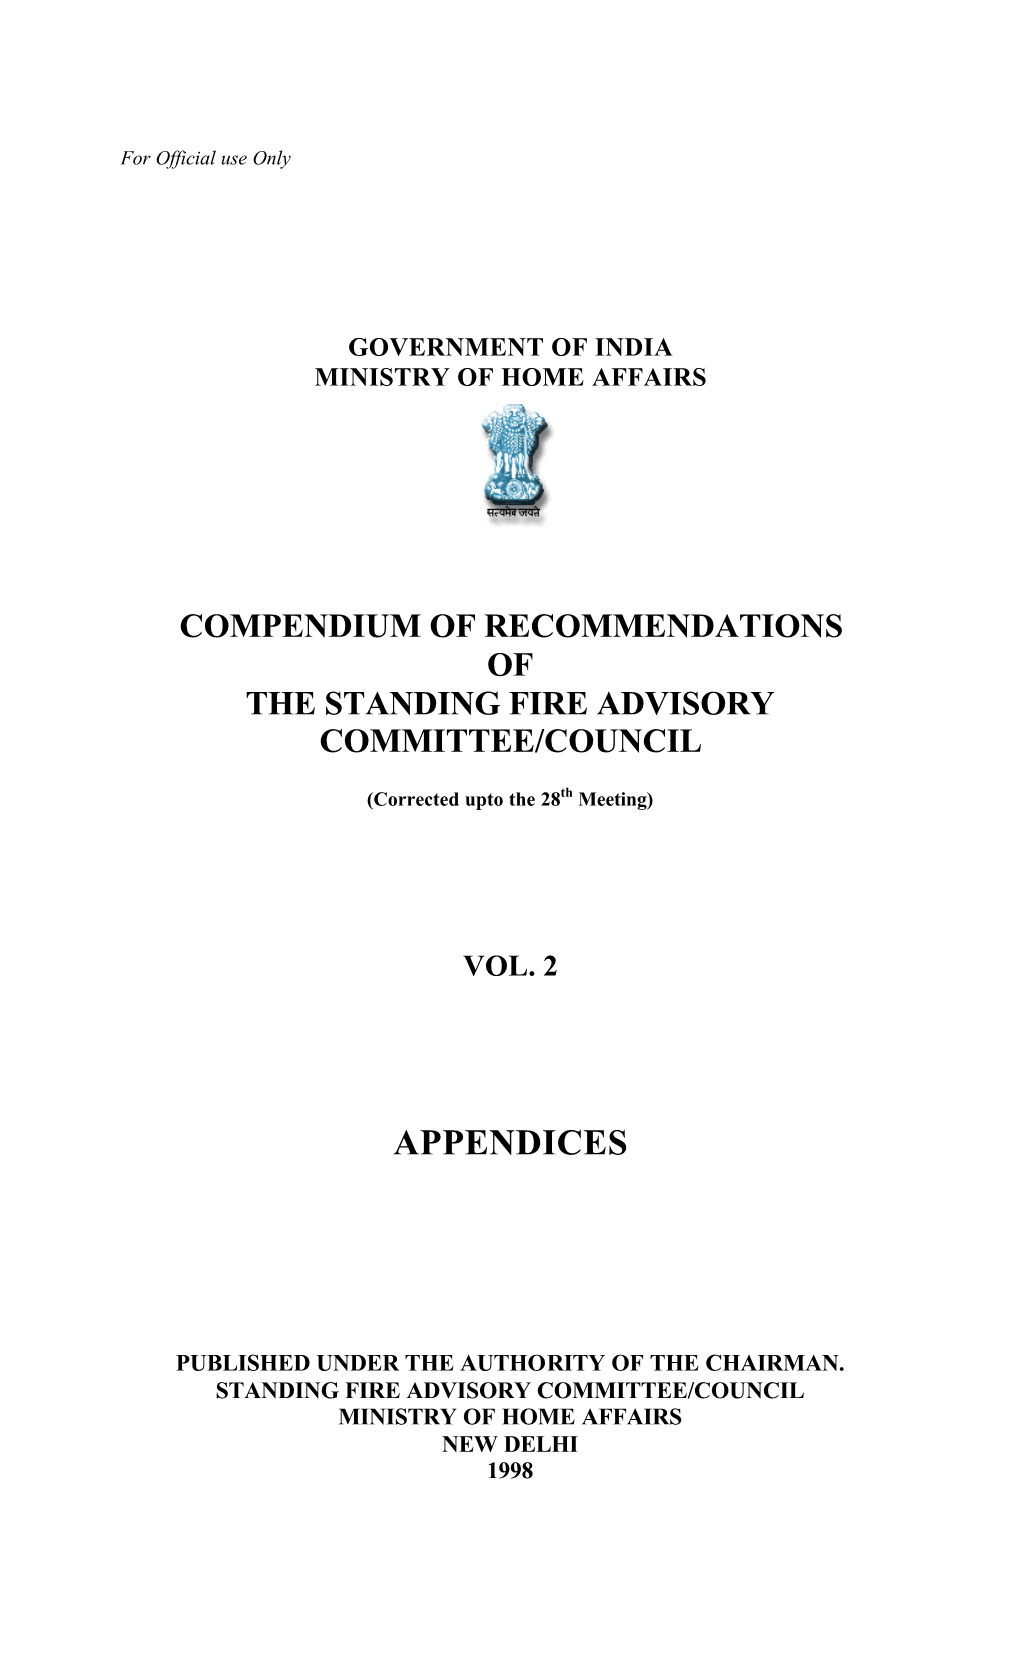 Compendium of Recommendations of the Standing Fire Advisory Committee/Council